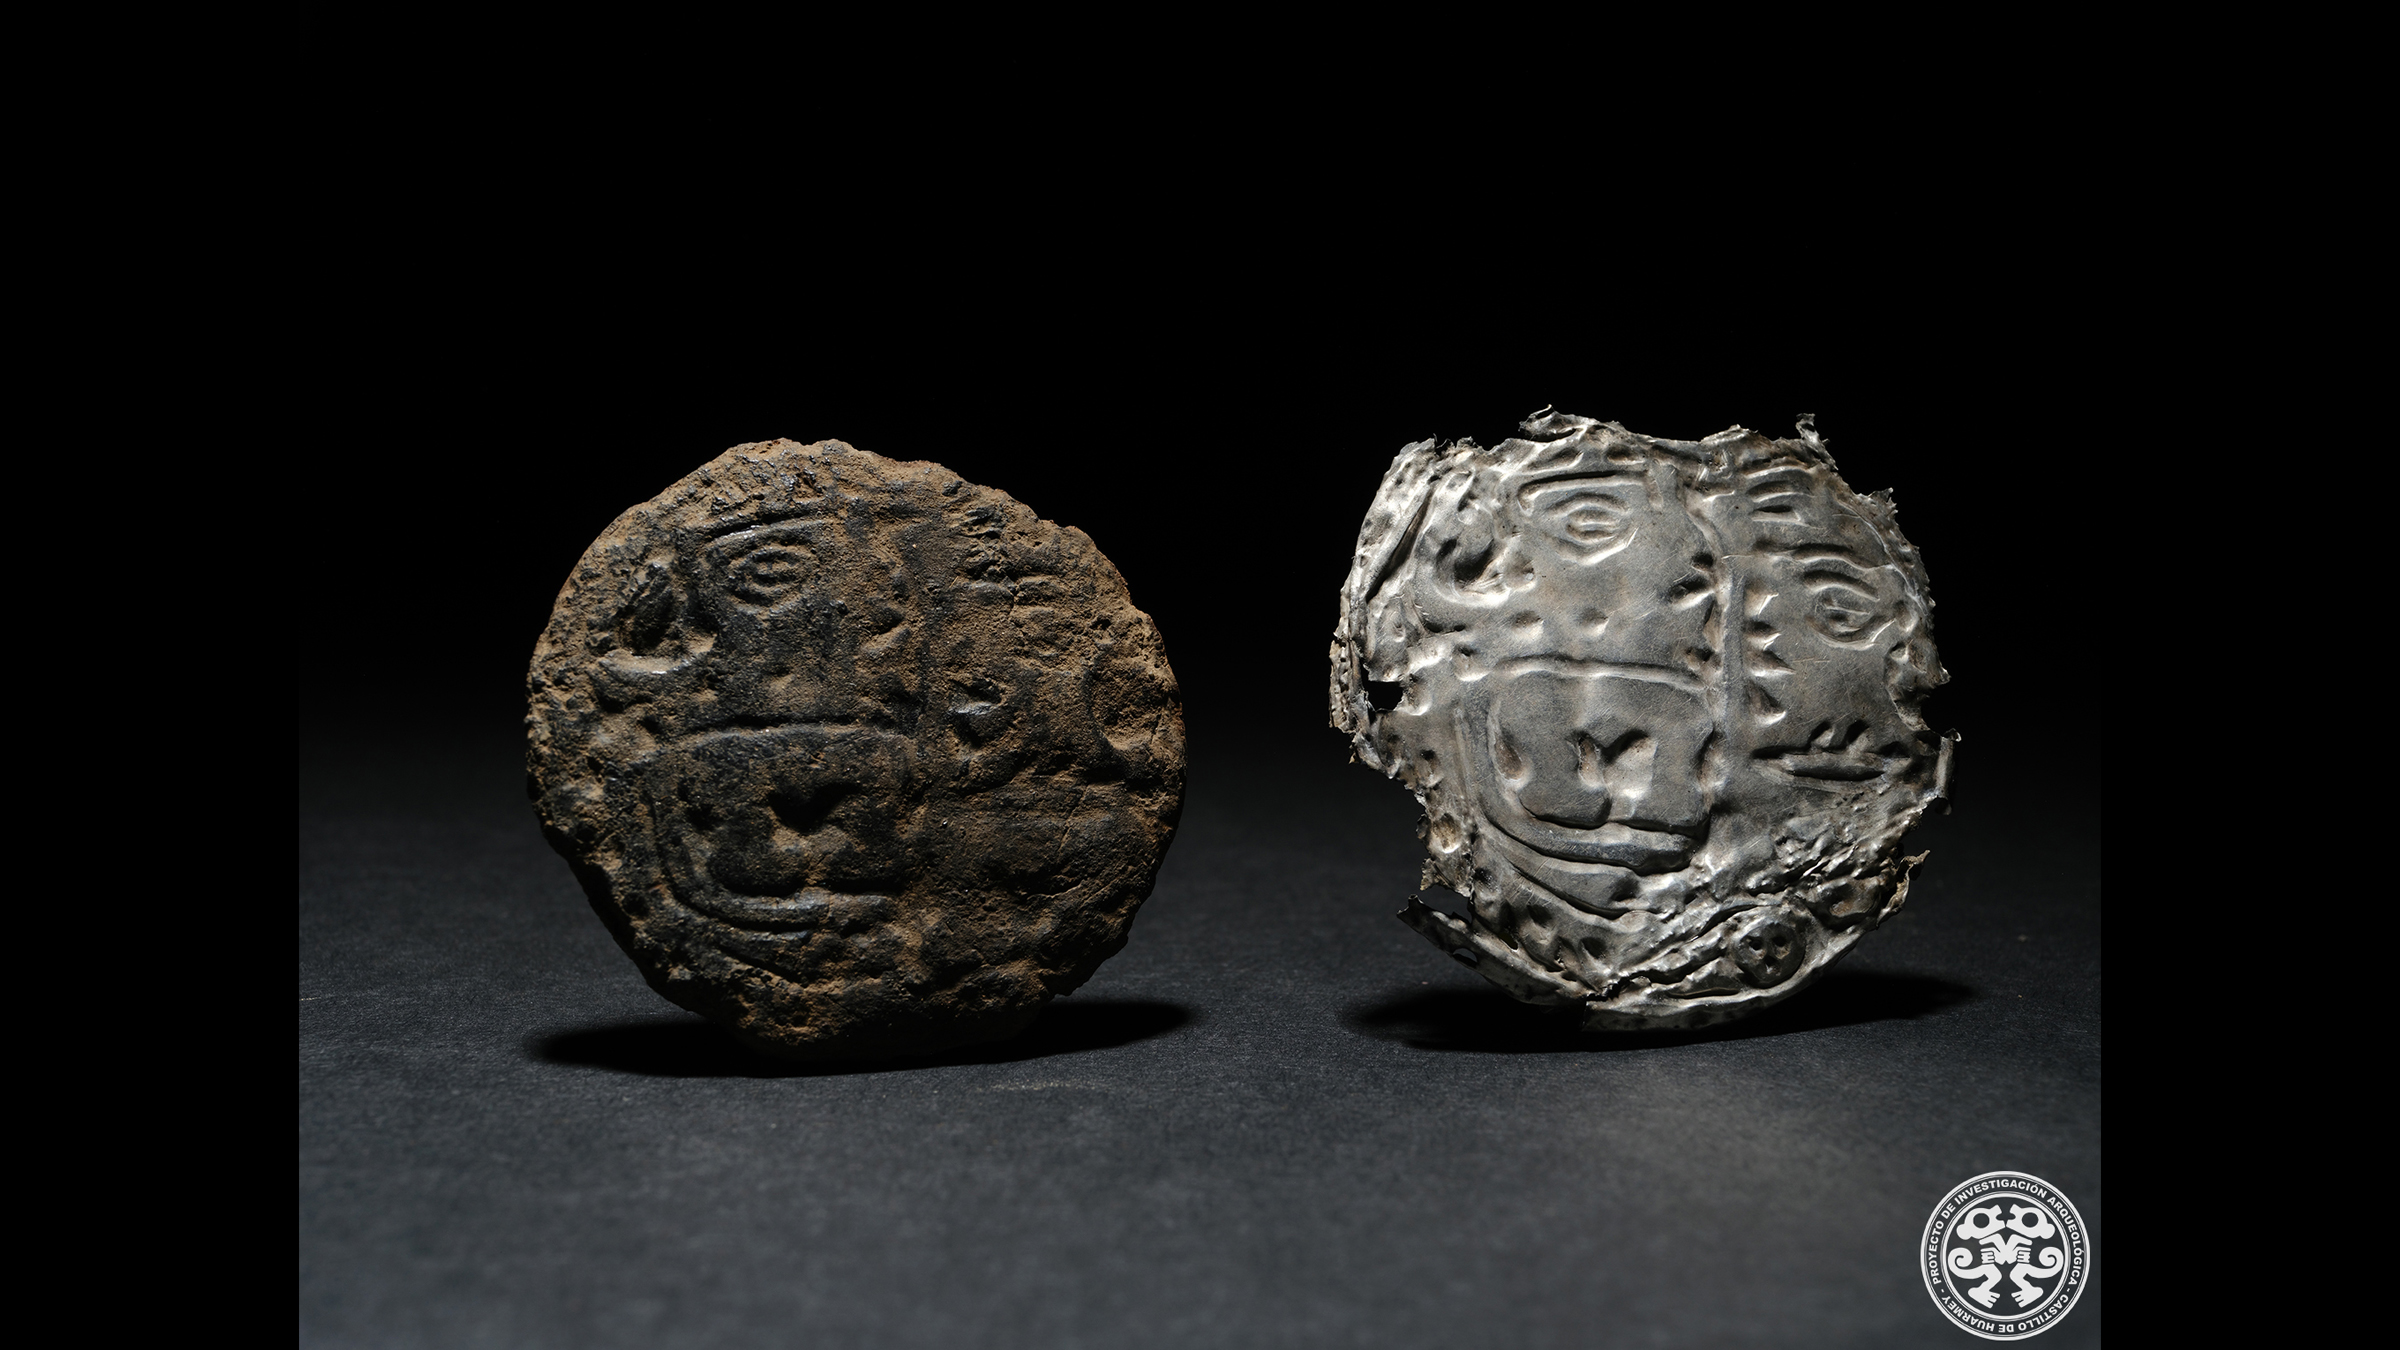 These silver ornaments, known as ear coils, were among the grave goods buried in the tomb with seven people who were buried there about 1,300 years ago.